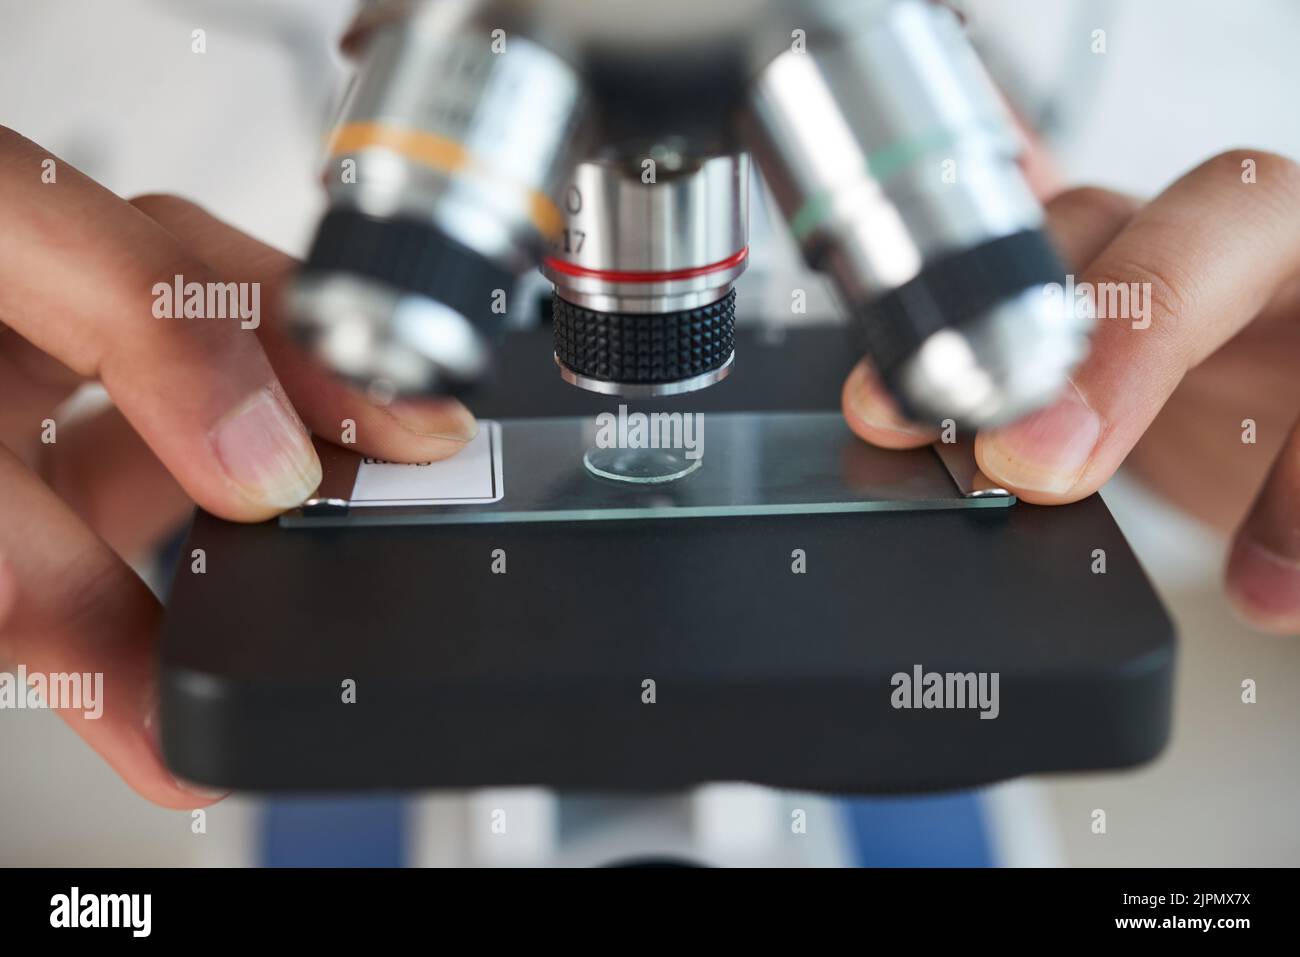 Extreme close-up of unrecognizable teenager examining sample with help of modern microscope while wrapped up in finishing school project Stock Photo